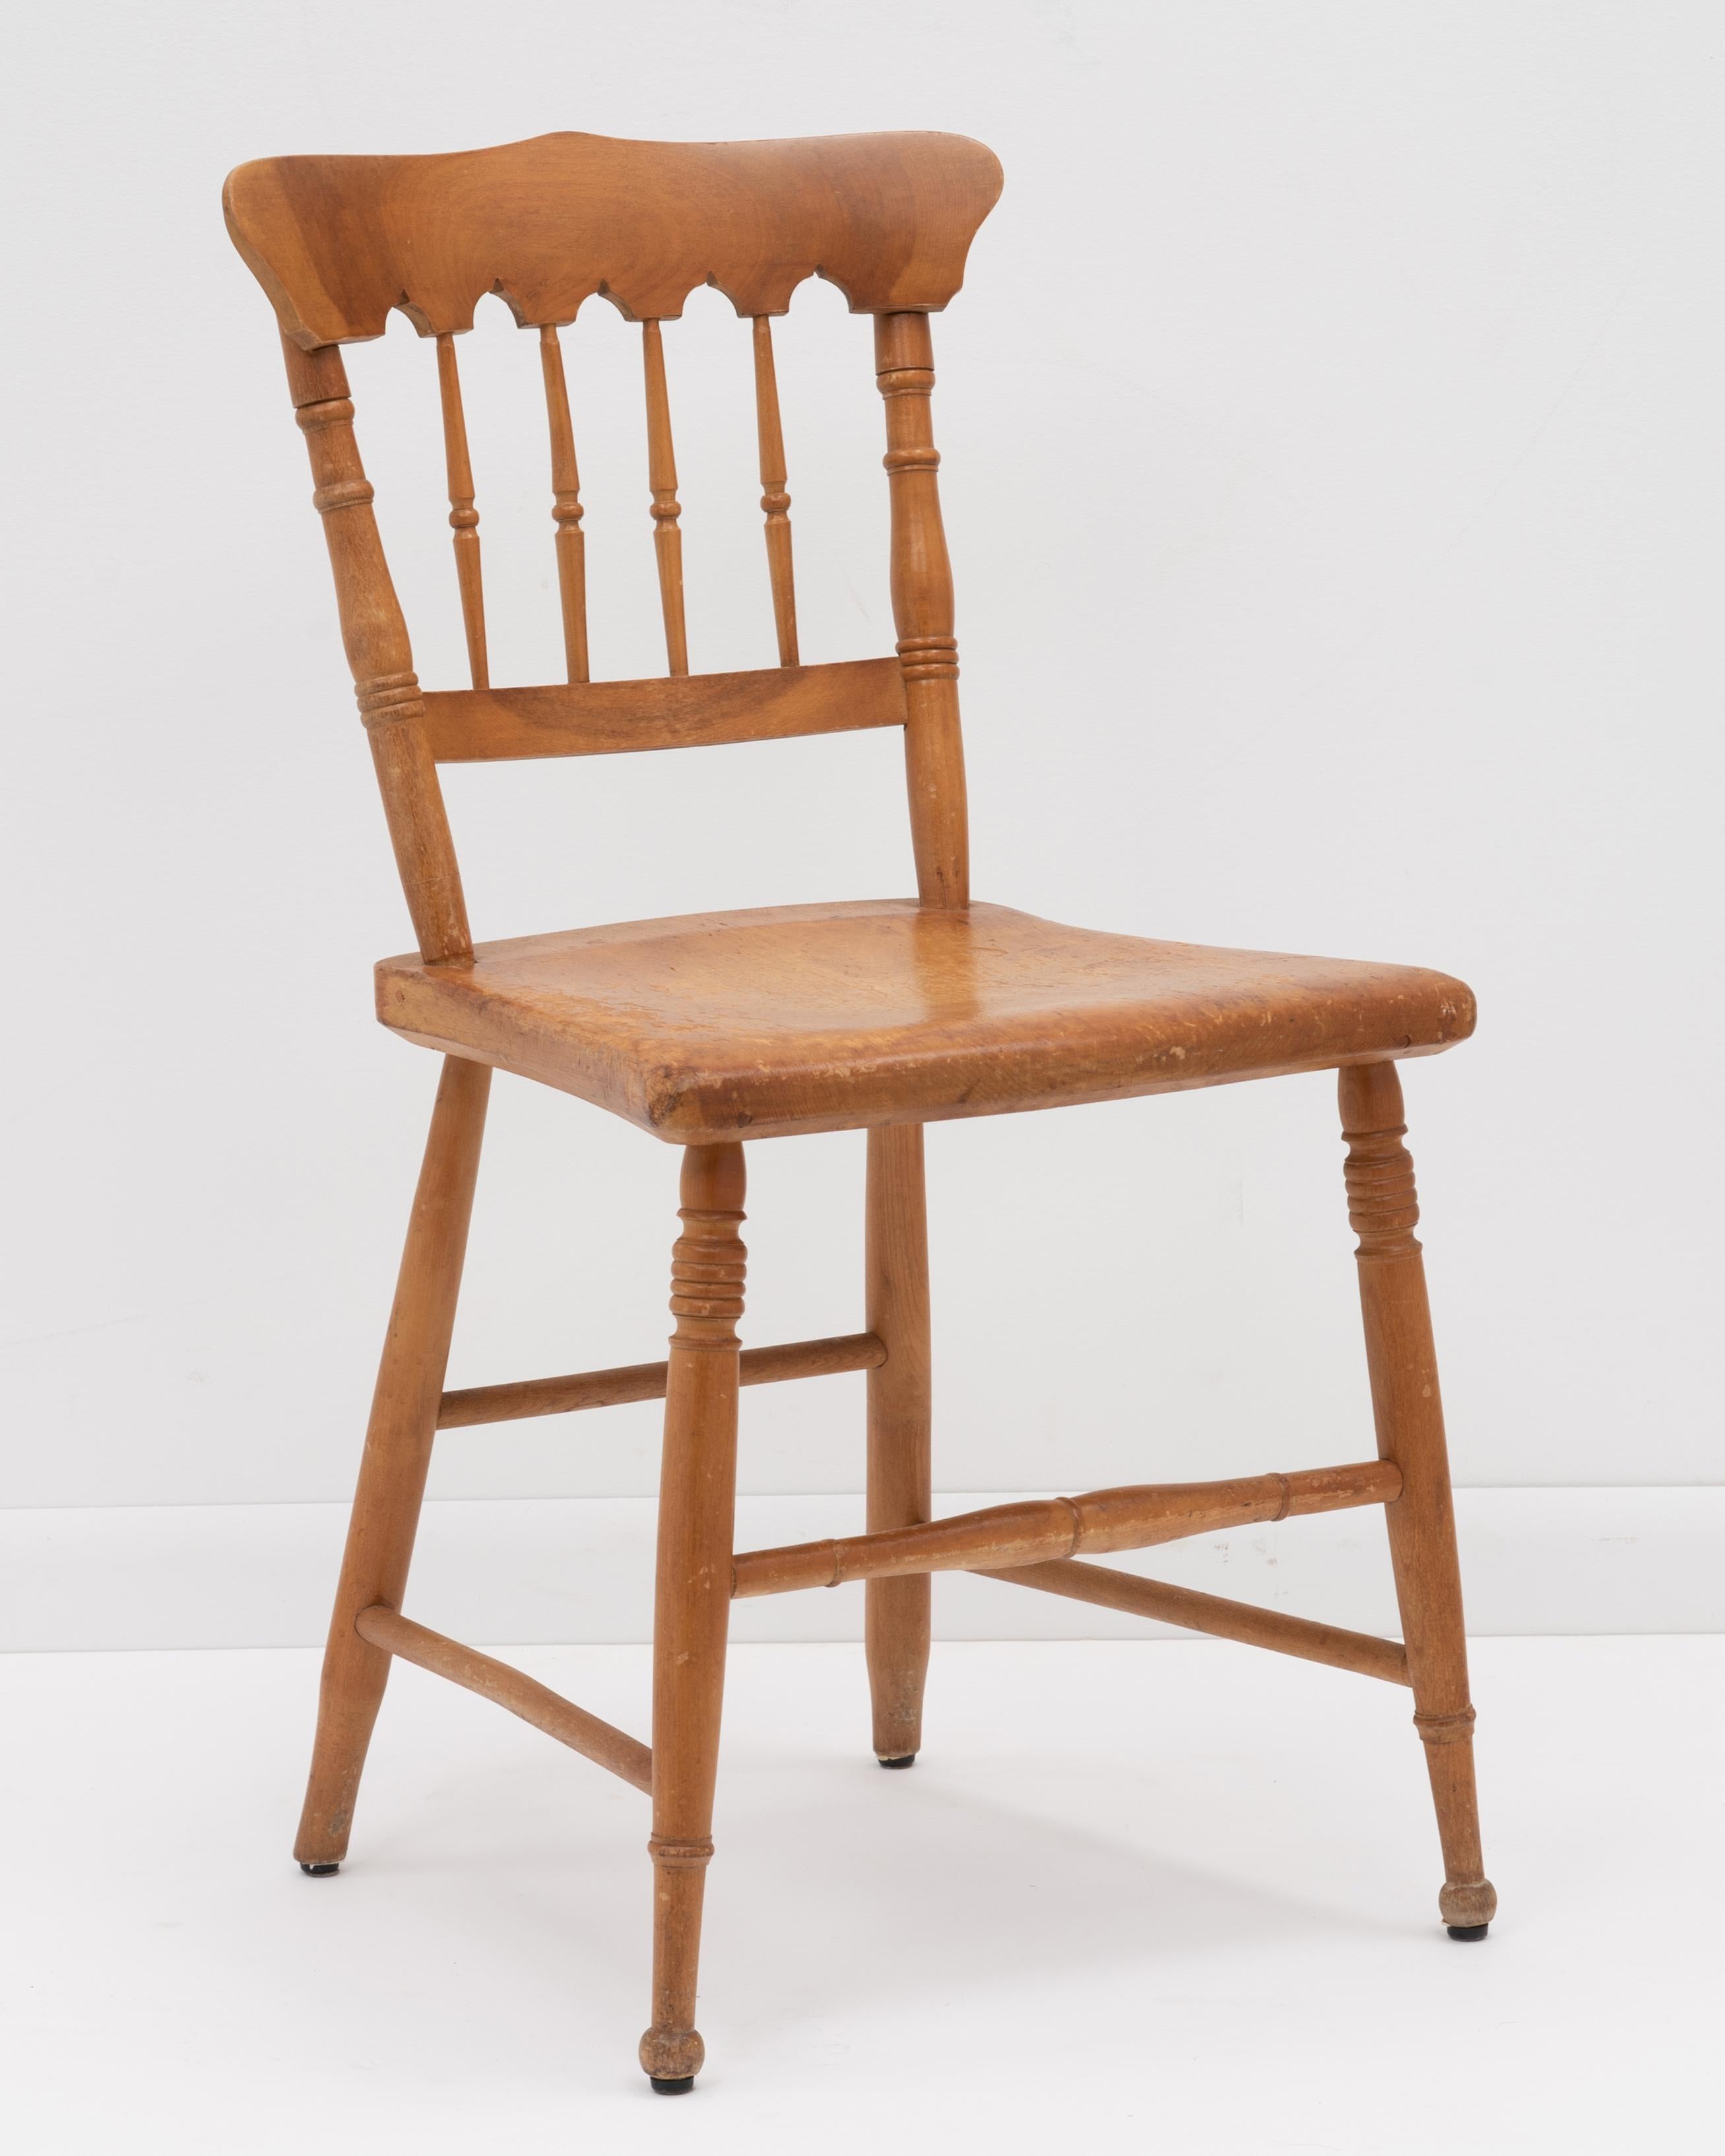 English Scrubbed Pine Plank Seat Dining Chairs Farmhouse Cottage, a Set of Four In Good Condition For Sale In Forest Grove, PA